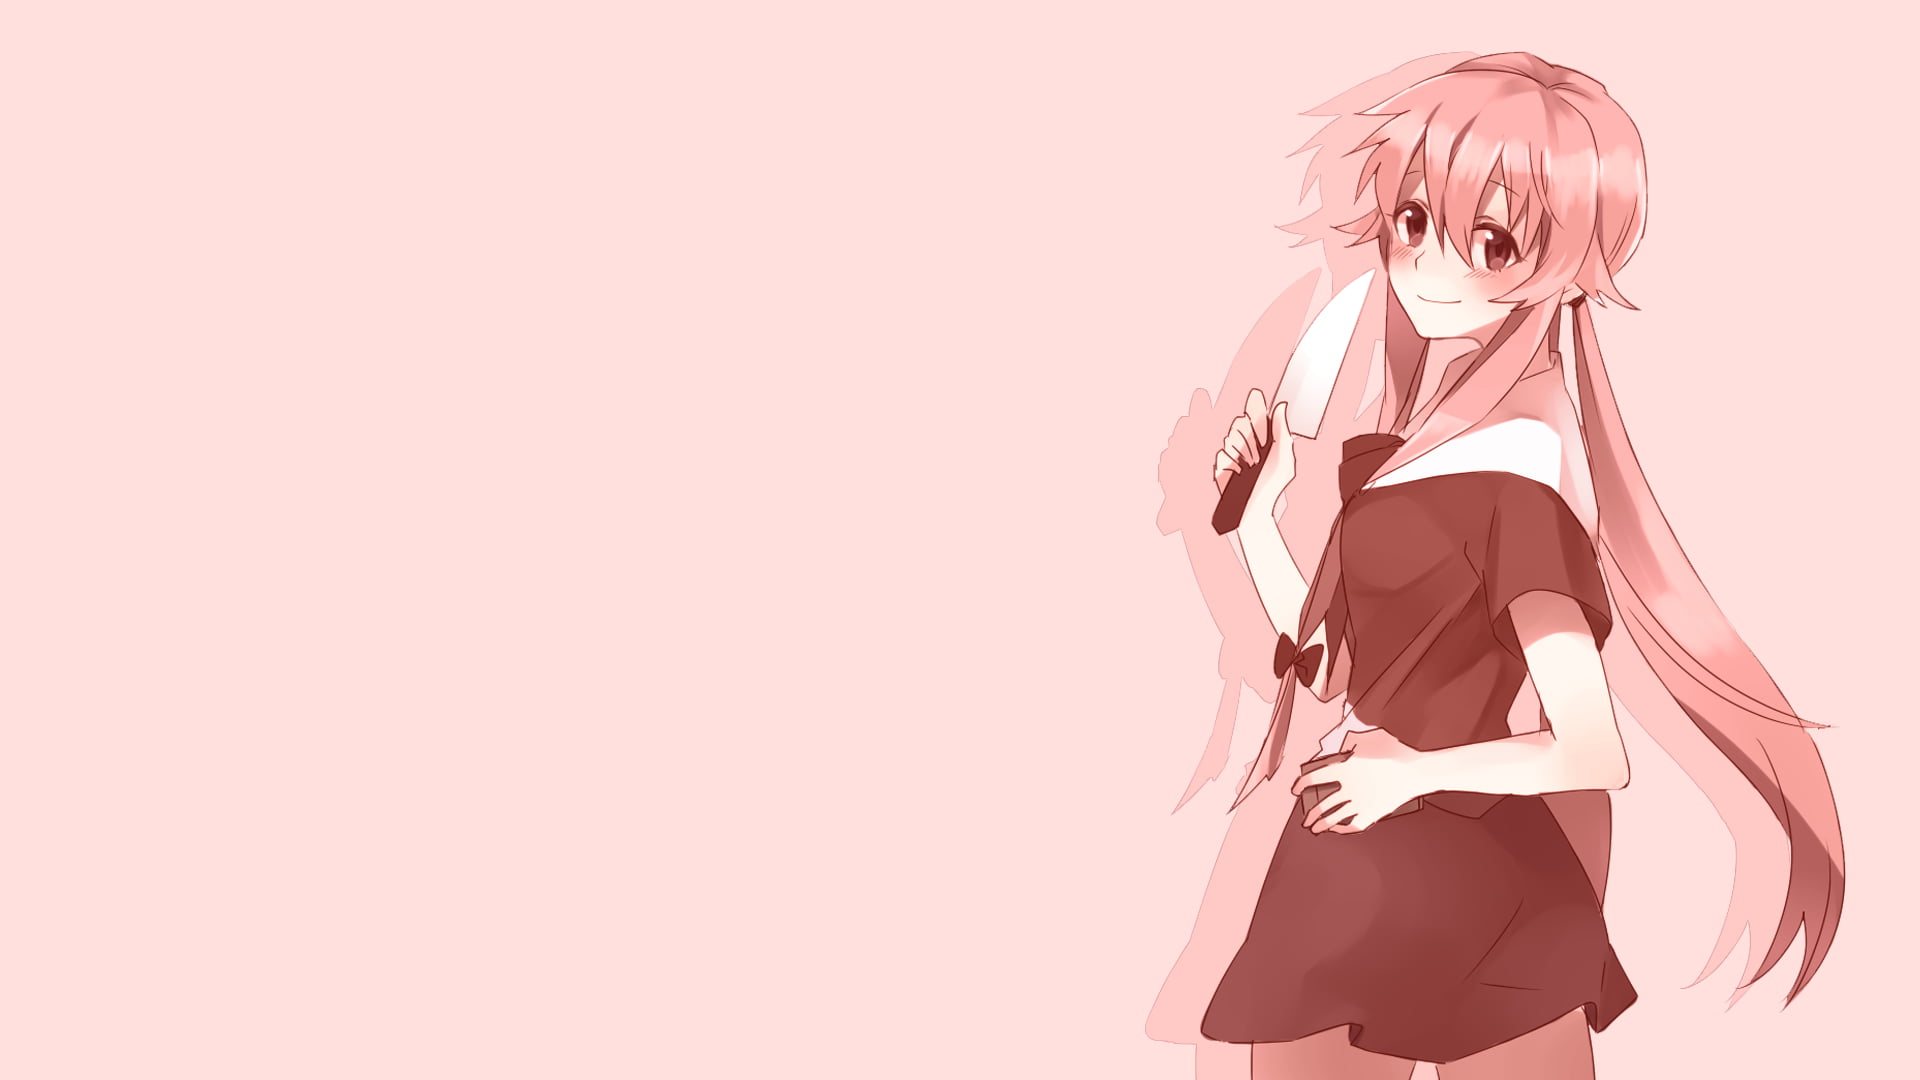 Pink Haired Woman Anime Character Illustration Hd Wallpaper - Gasai Yuno Png , HD Wallpaper & Backgrounds